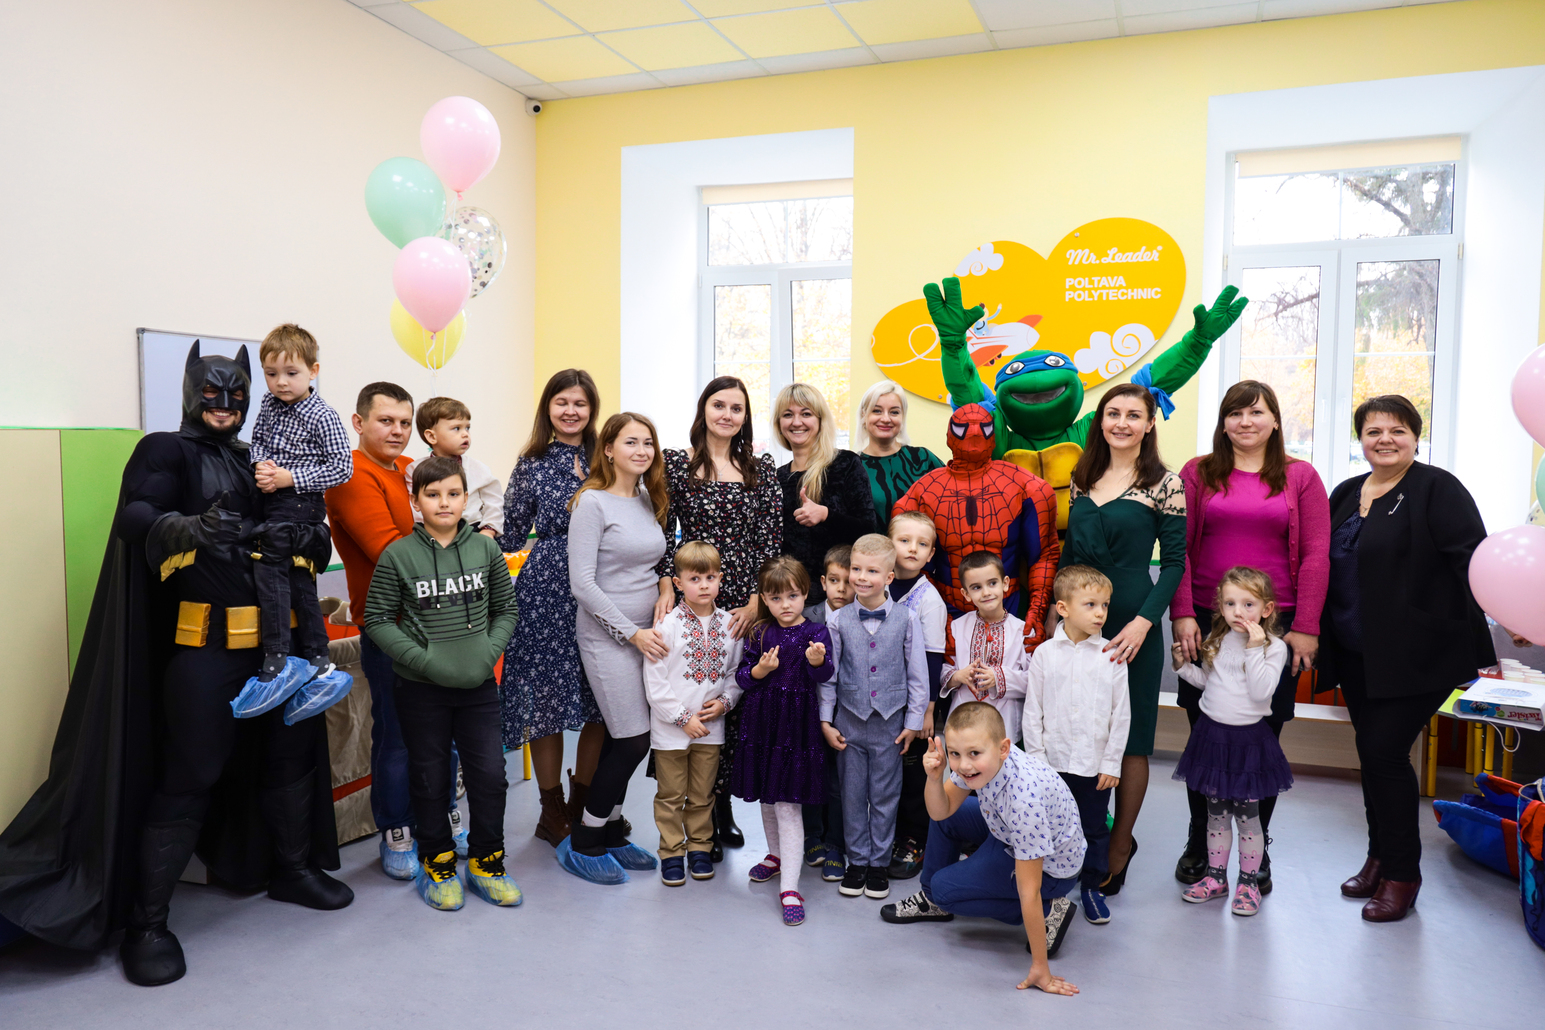 Poltava Polytechnic Center for Education and Care of Preschool Children celebrates its first month of work